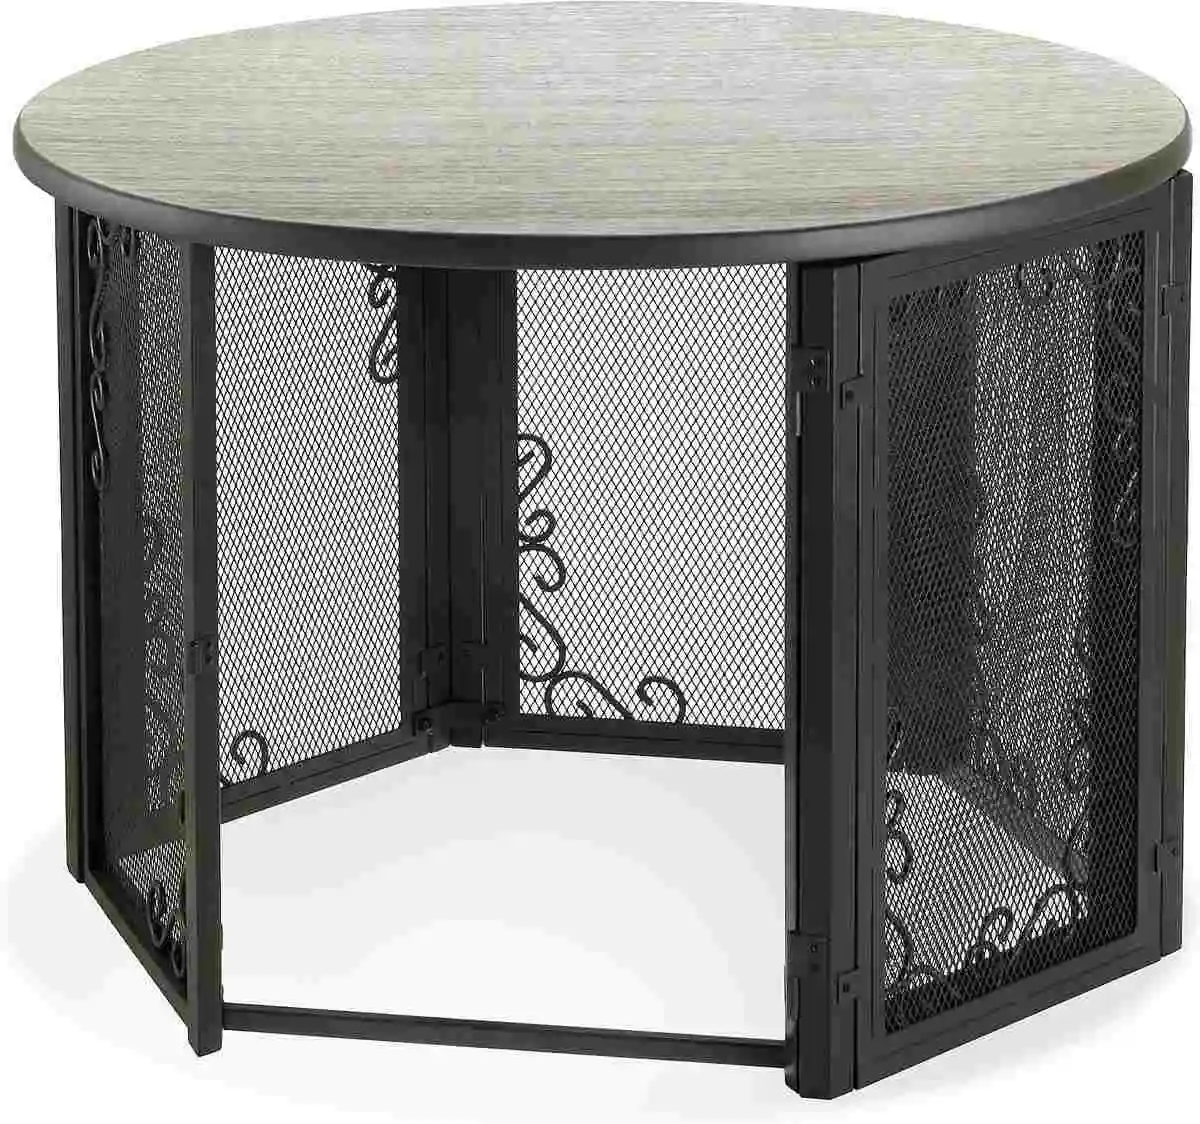 Richell Accent Table Dog Crate, Antique Bronze